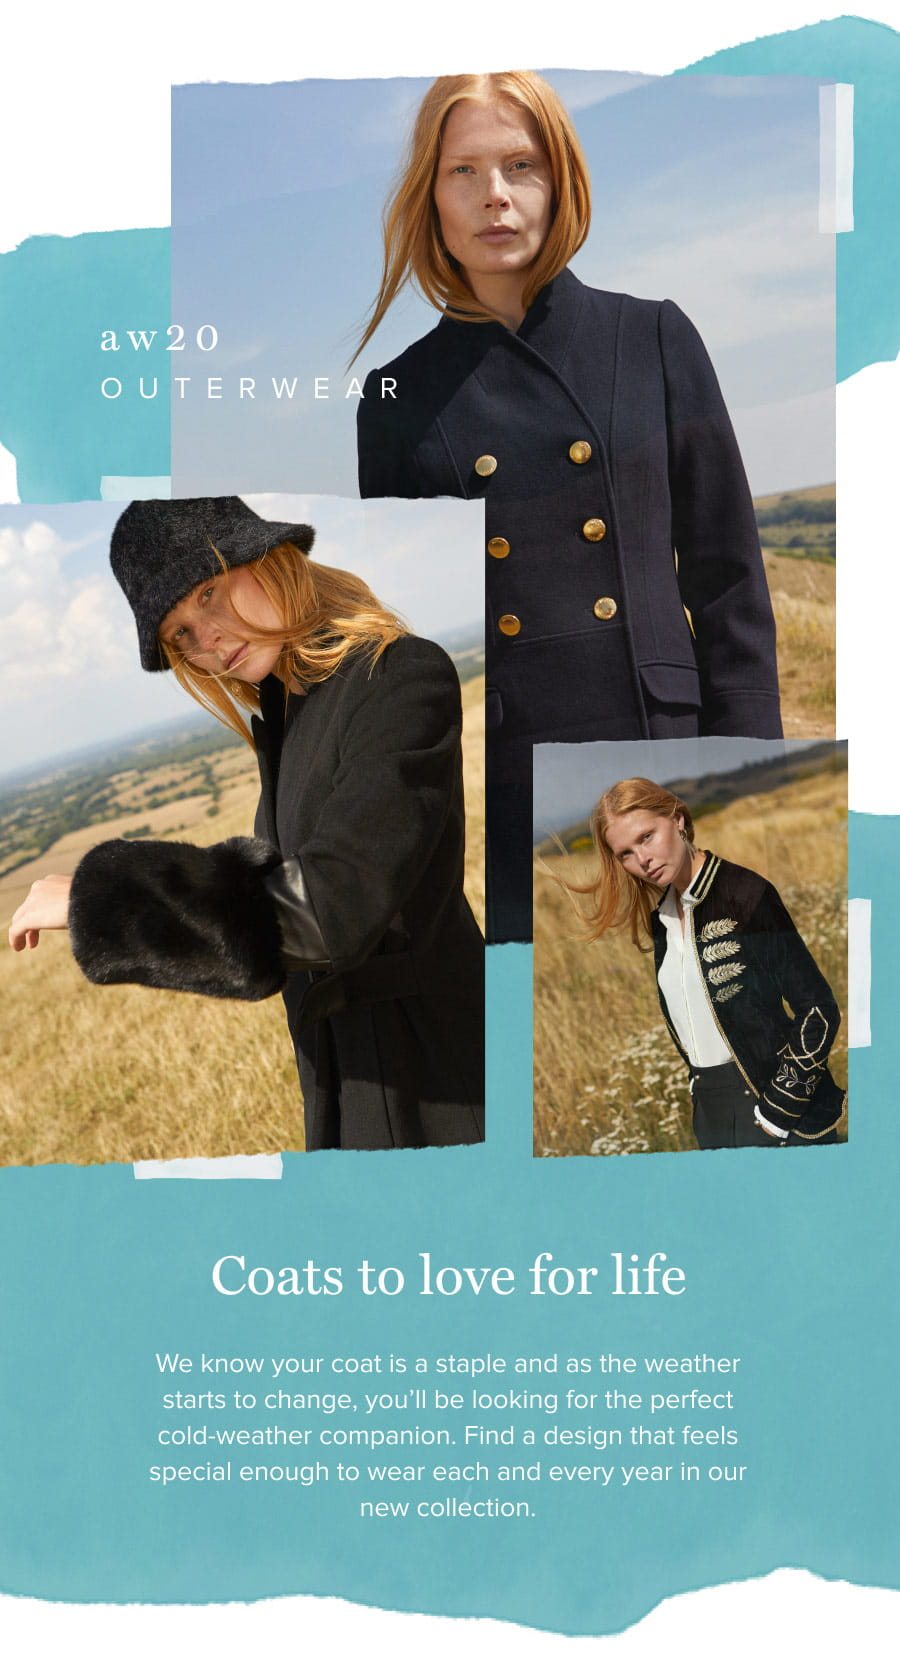 Coats to love for life